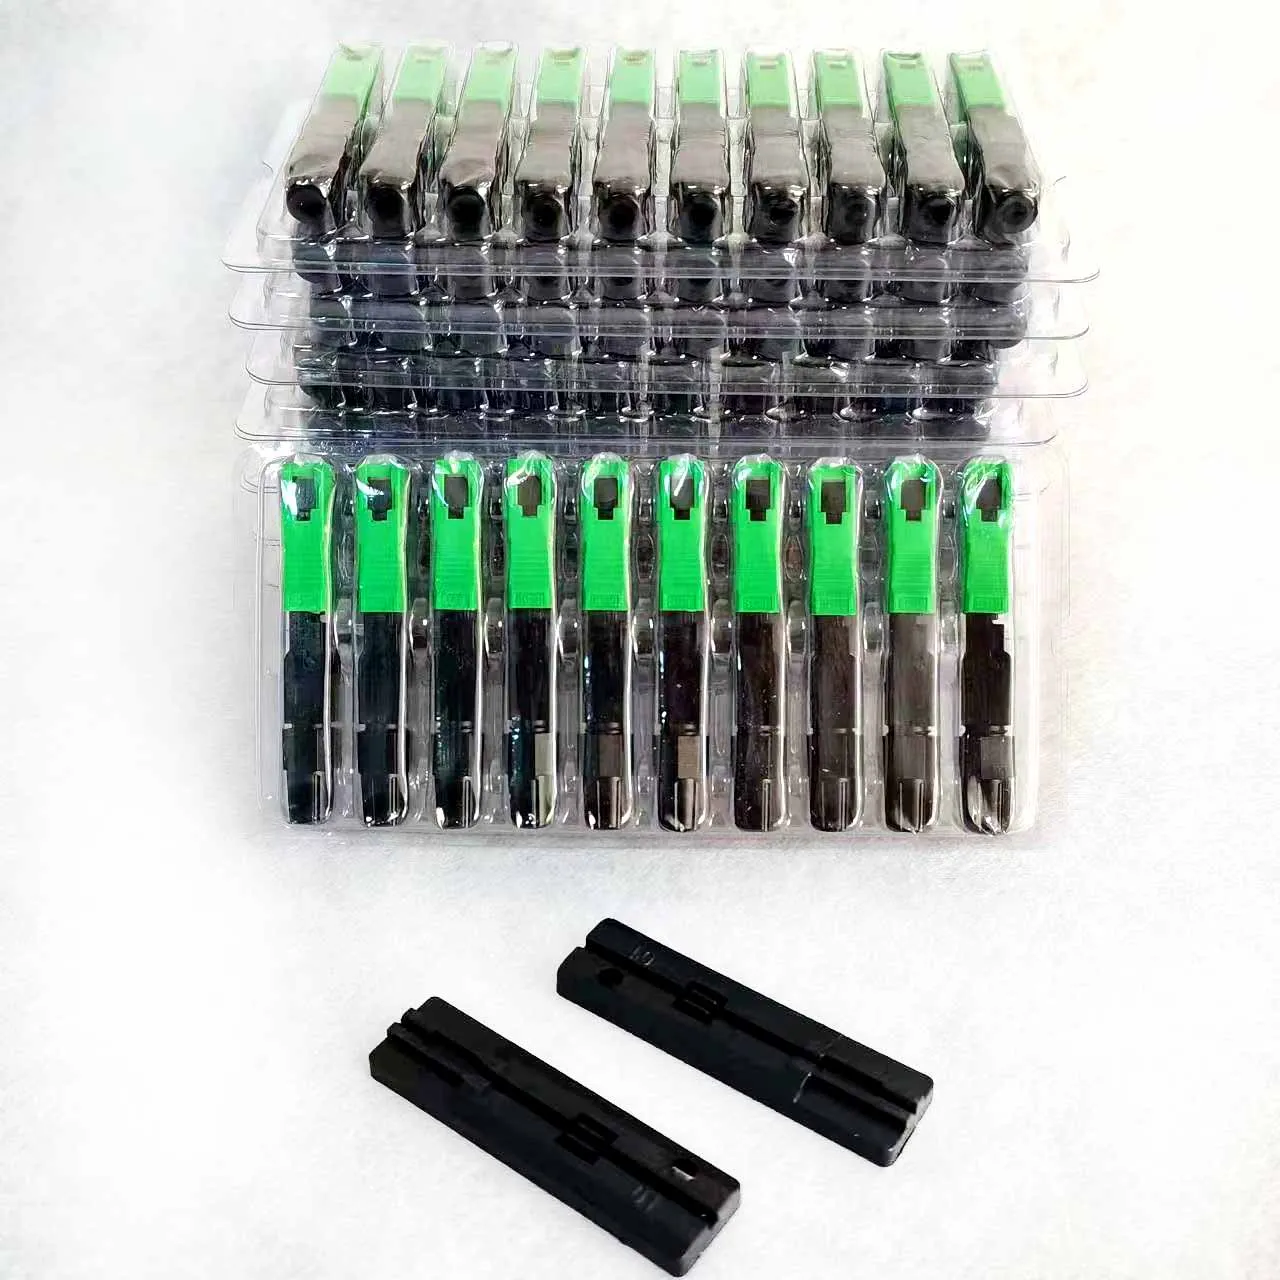 

100pcs SC APC Fast Connector Embedded Connector FTTH Tool Cold Fiber Fast Connector SC Fiber Optic Connector